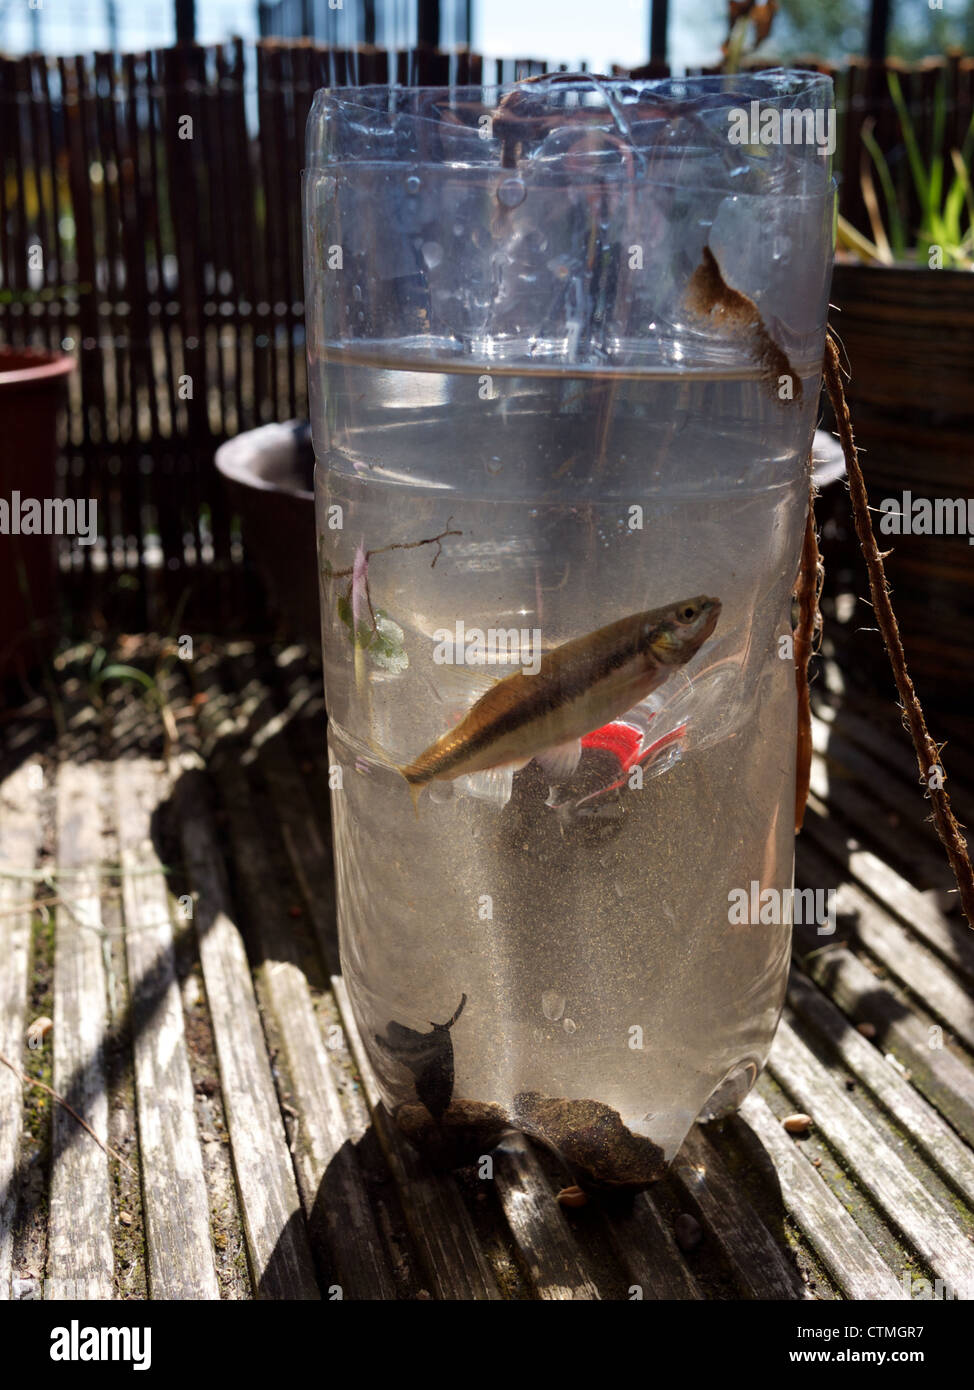 Fish caught in a simple bottle trap Stock Photo - Alamy